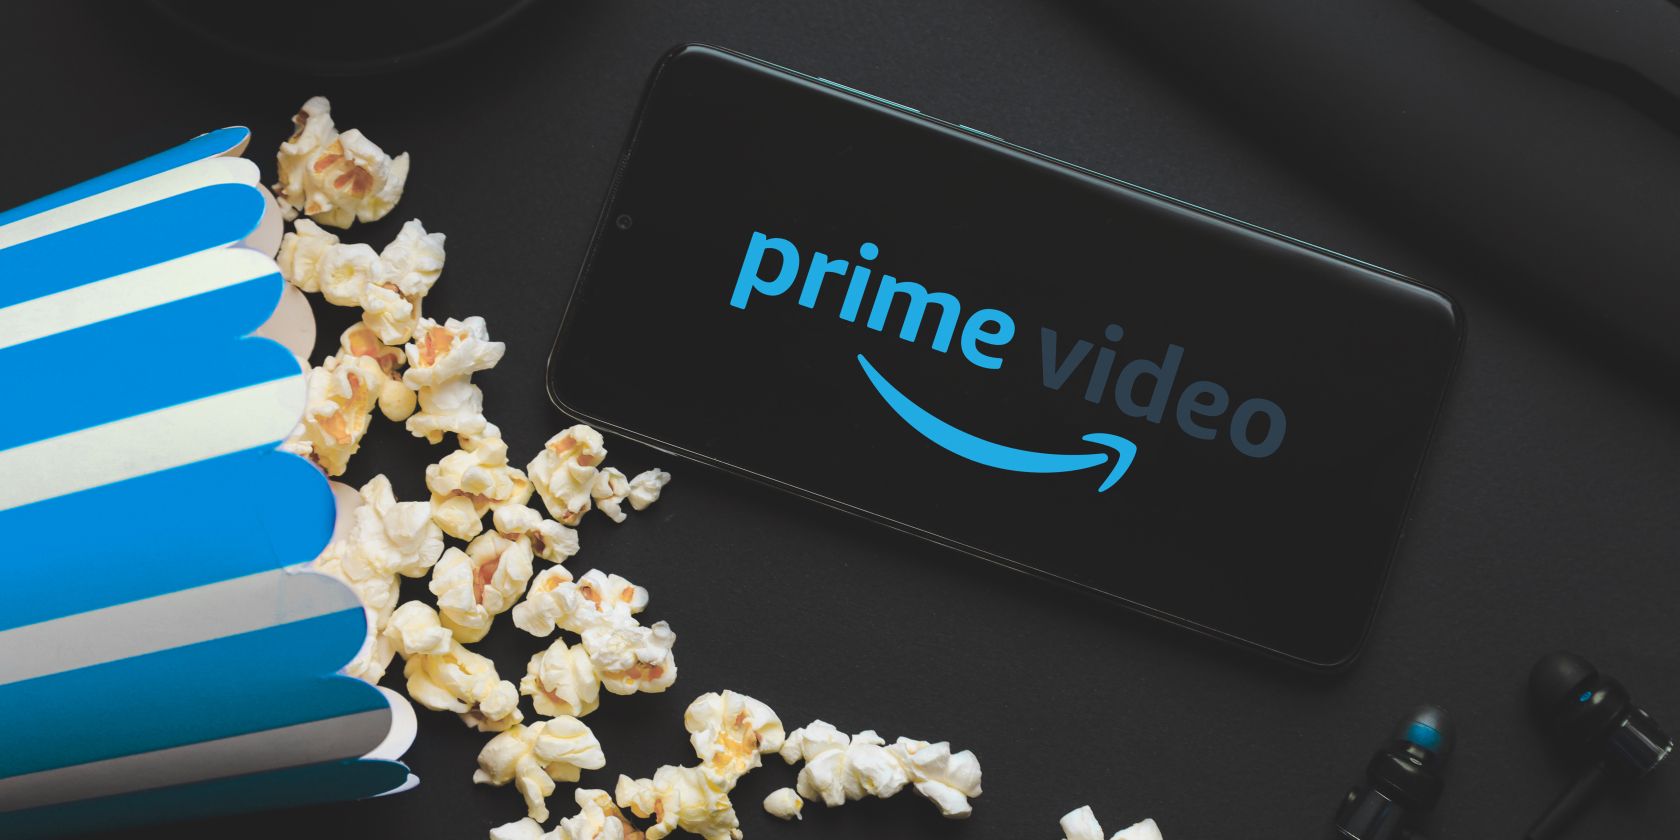 prime video logo on phone with popcorn